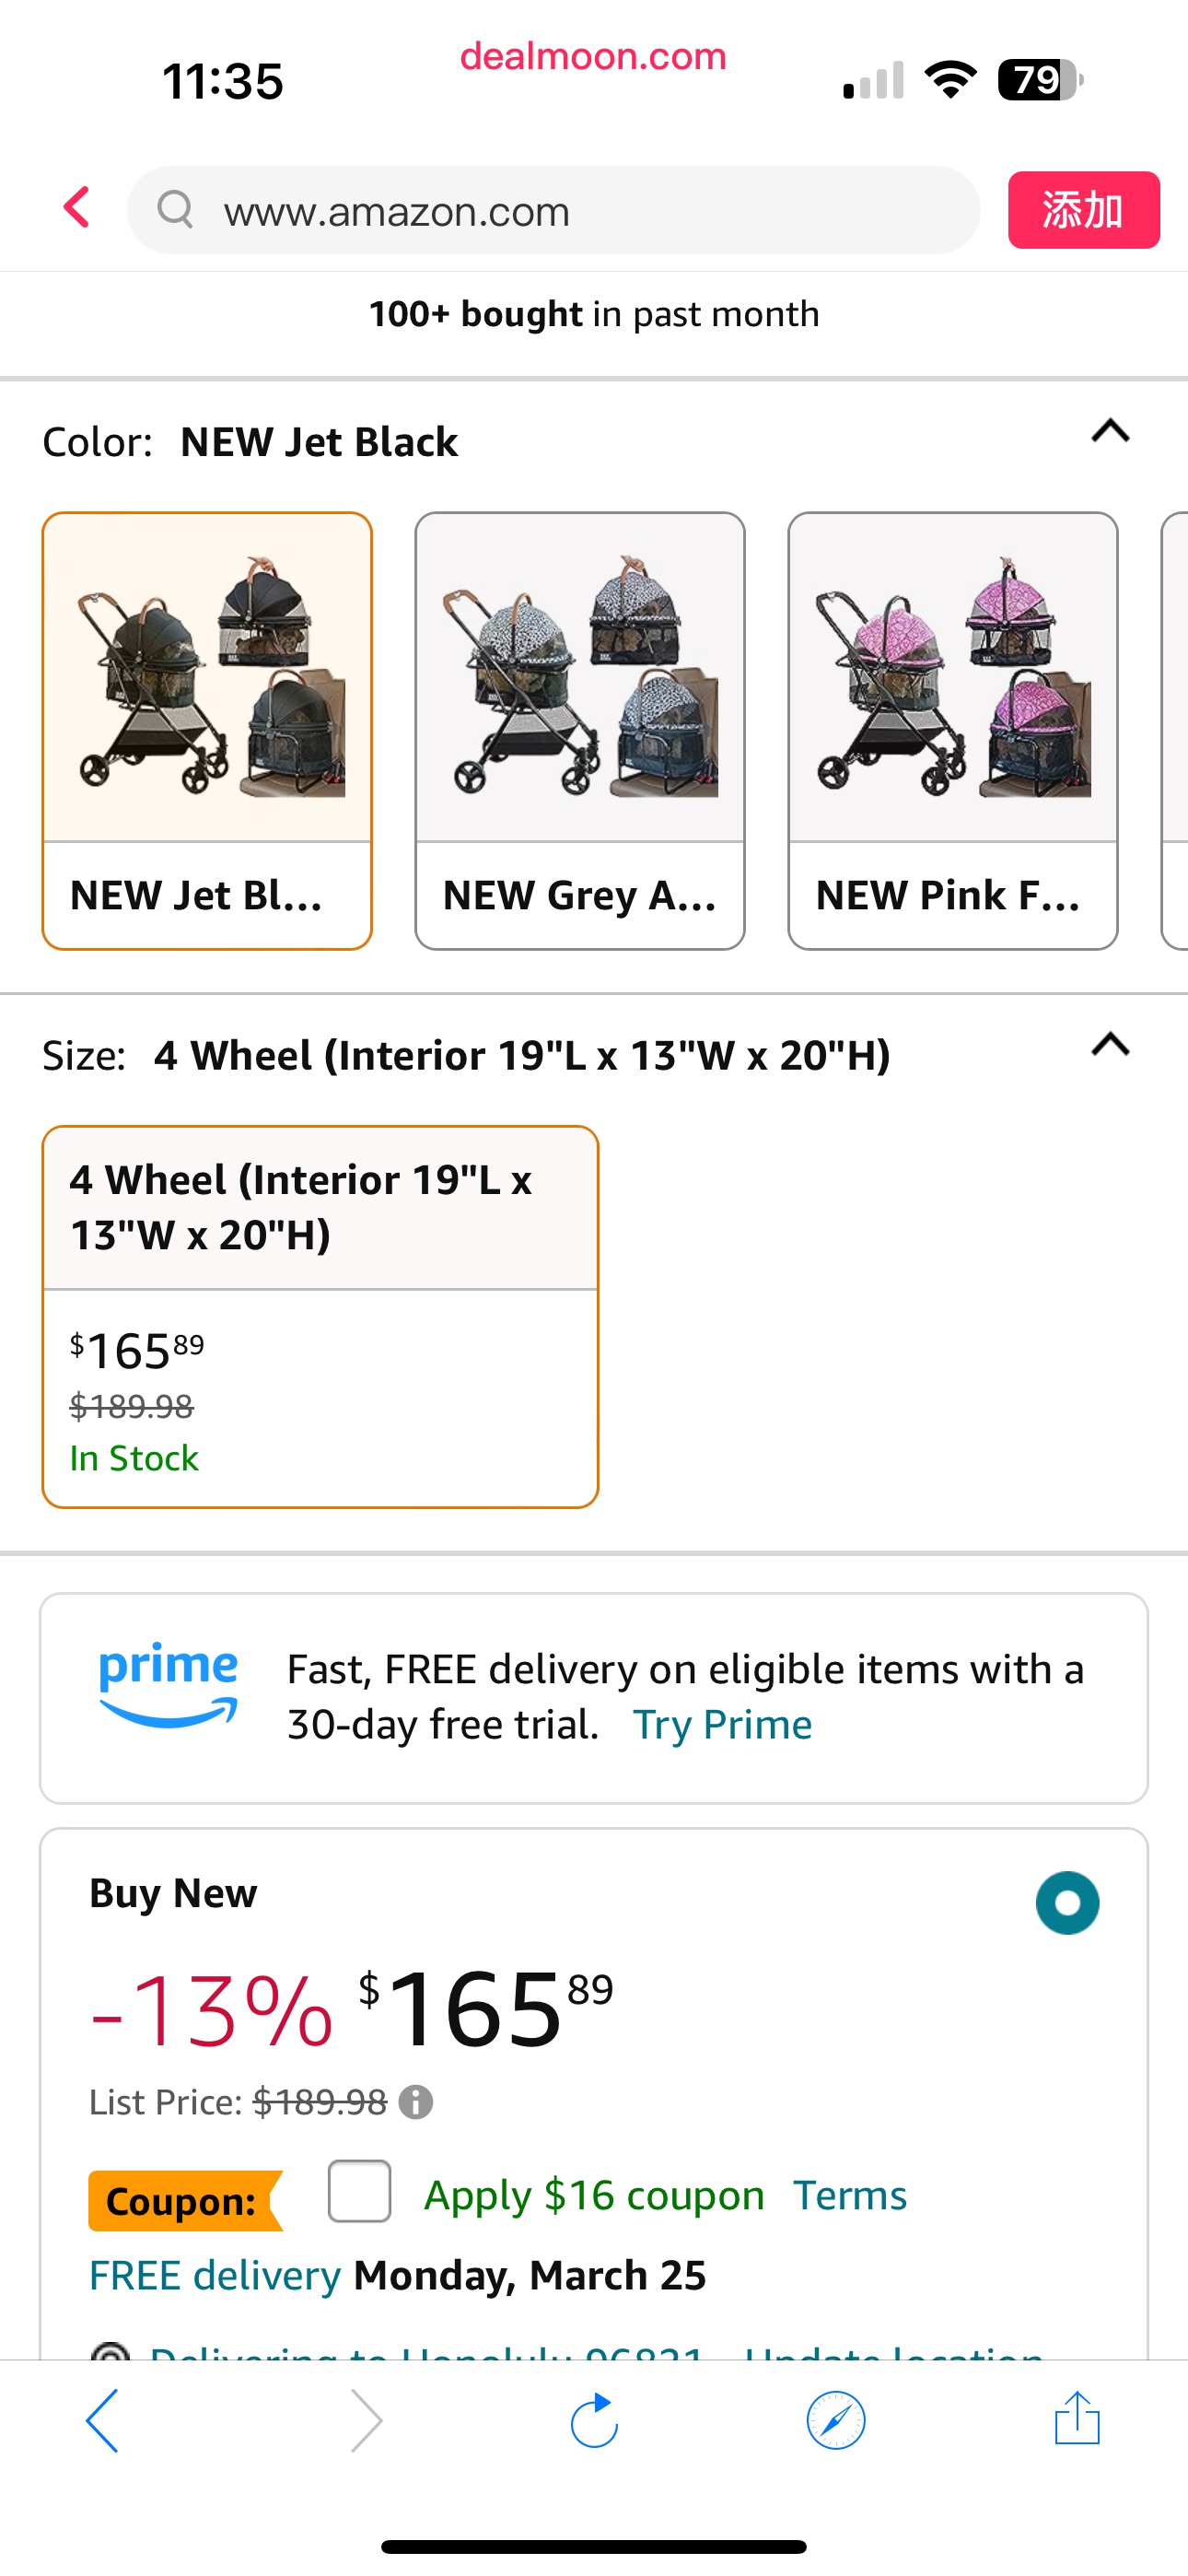 Amazon.com : Pet Gear 3-in-1 Travel System, View 360 Stroller Converts to Carrier and Booster Seat with Easy Click N Go Technology, for Small Dogs & Cats, 4 Colors : Pet Supplies
三合一宠物旅行推车提篮